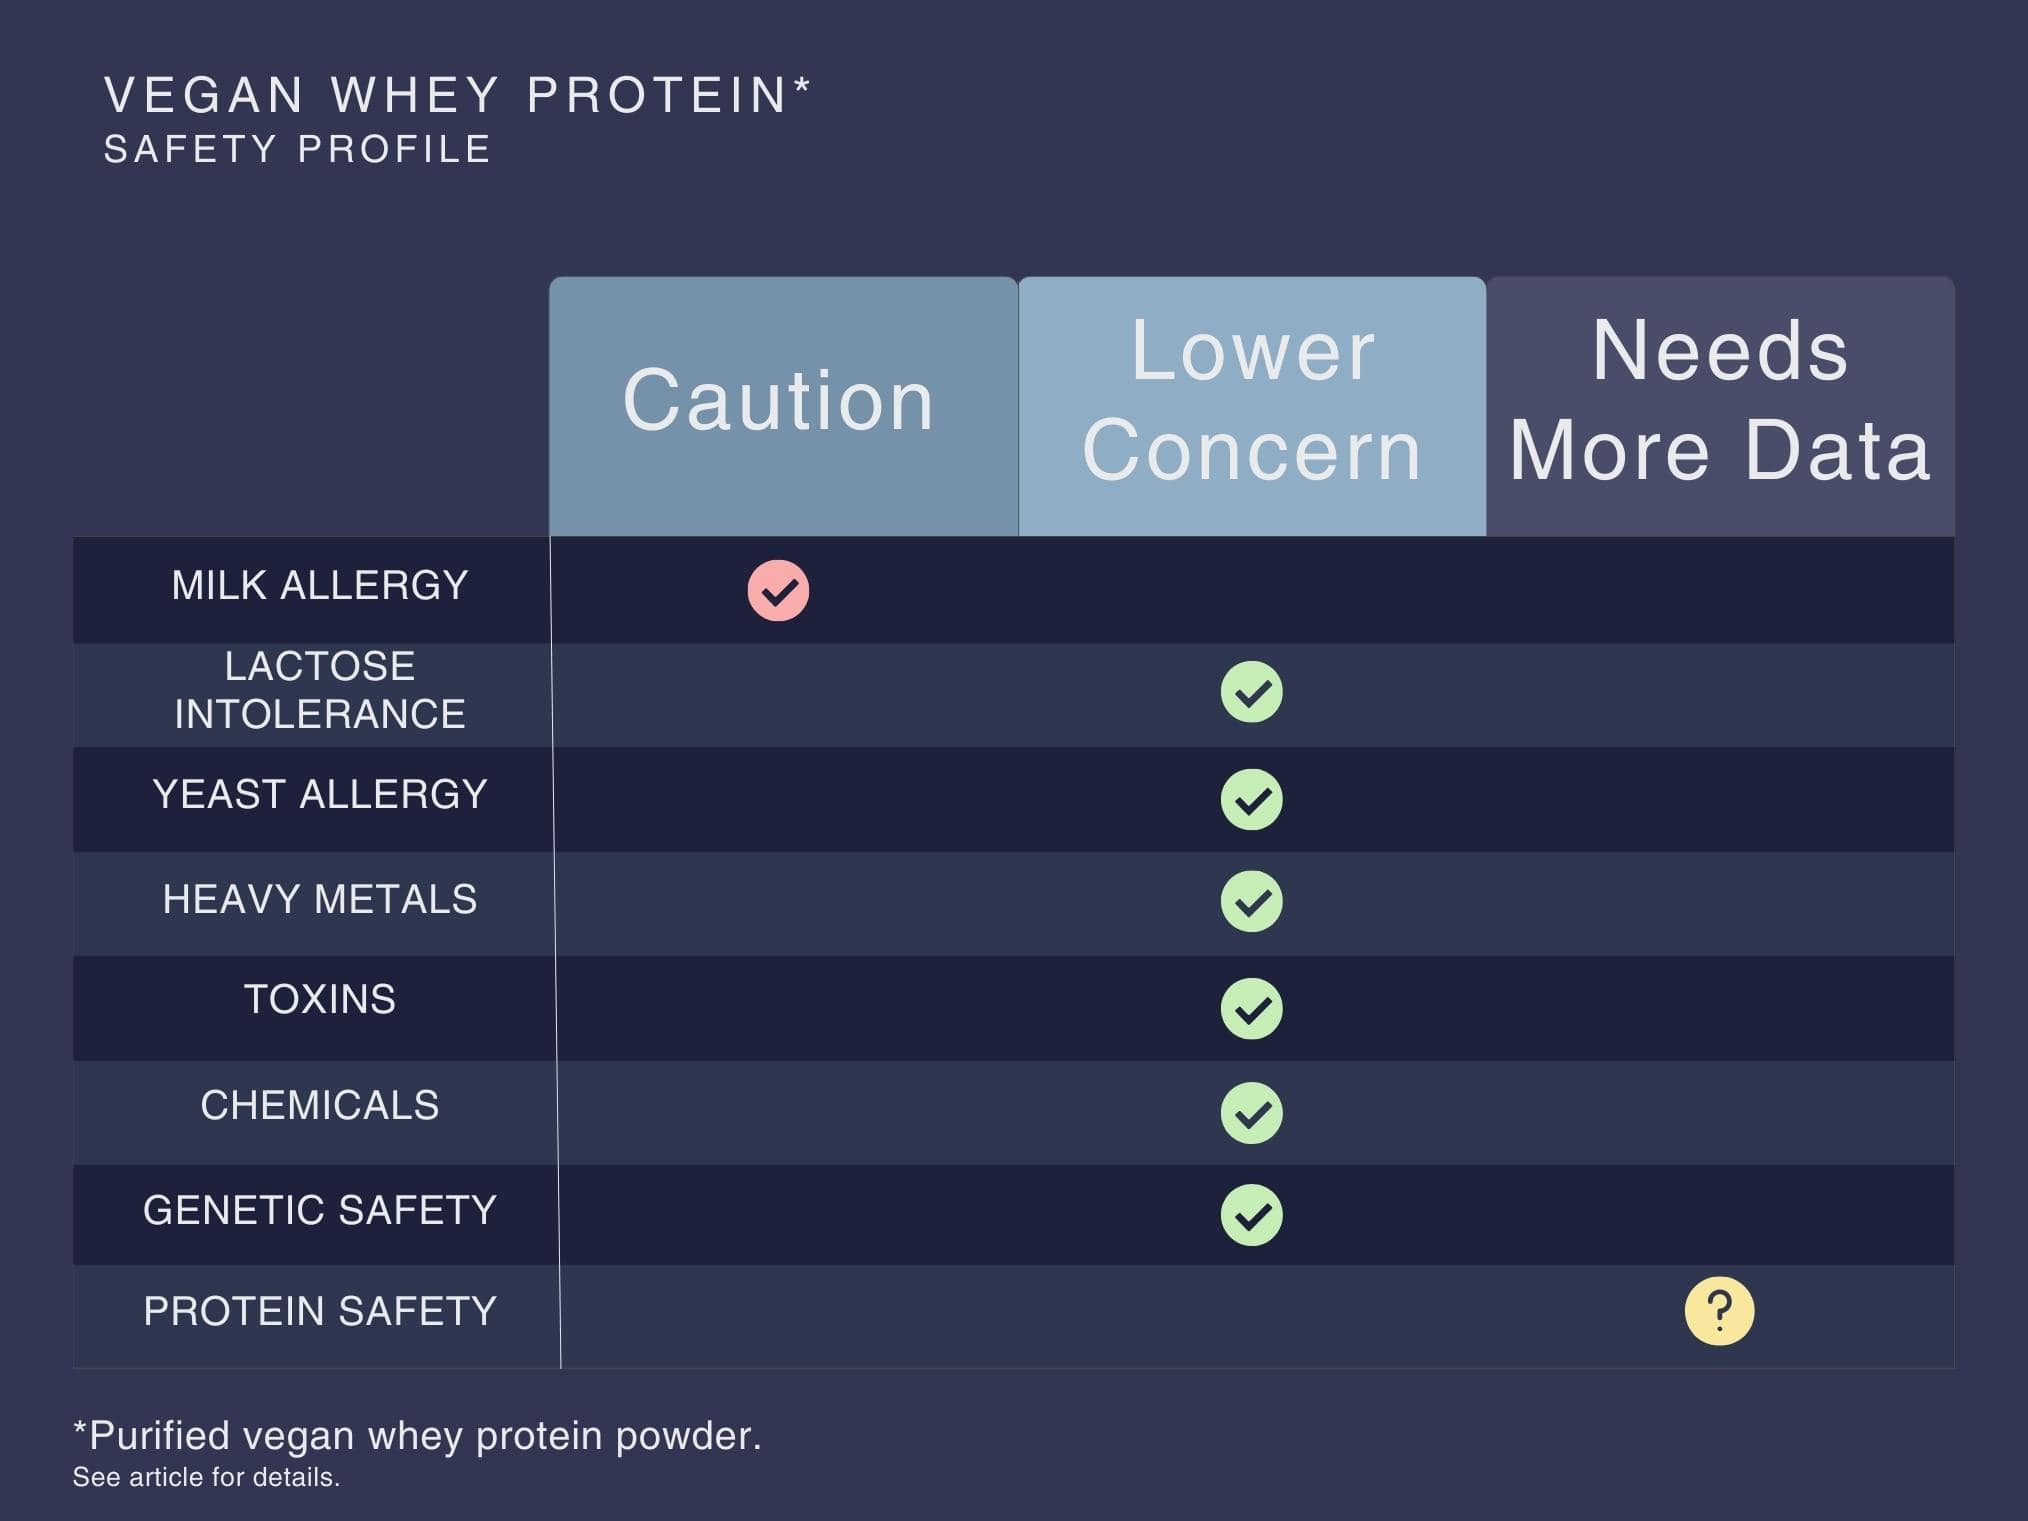 This image shows the safety profile of vegan whey protein powder. Caution is warranted for people with milk allergy. More data is necessary to determine the protein safety of vegan whey protein powder. Vegan whey protein powder is likely safe with respect to lactose intolerance, yeast allergy, heavy metals, toxins, chemicals, and genetics.